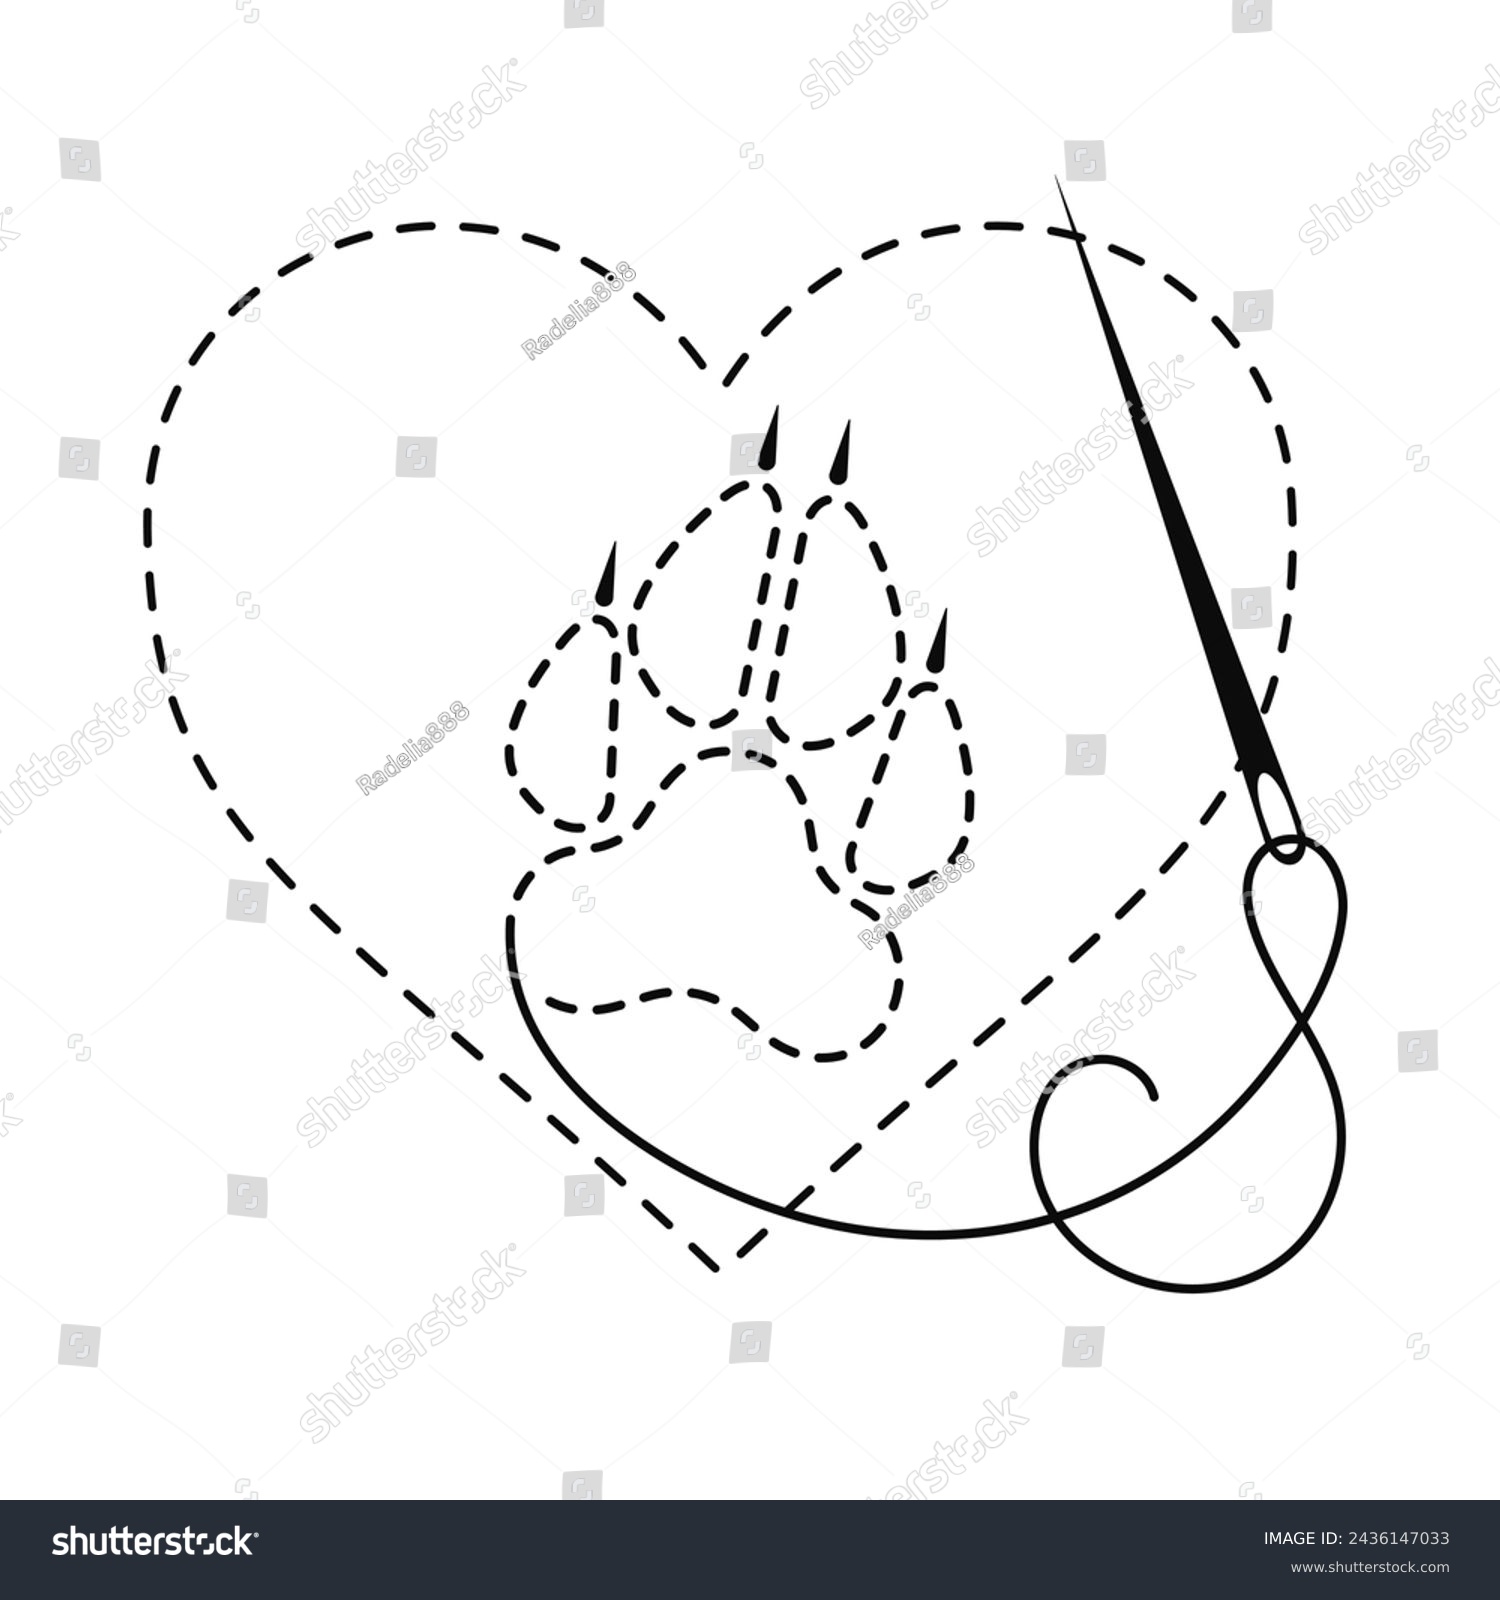 SVG of Silhouette of wolf paw and heart with interrupted contour. Vector illustration of handmade work with embroidery thread and sewing needle on white background.	 svg